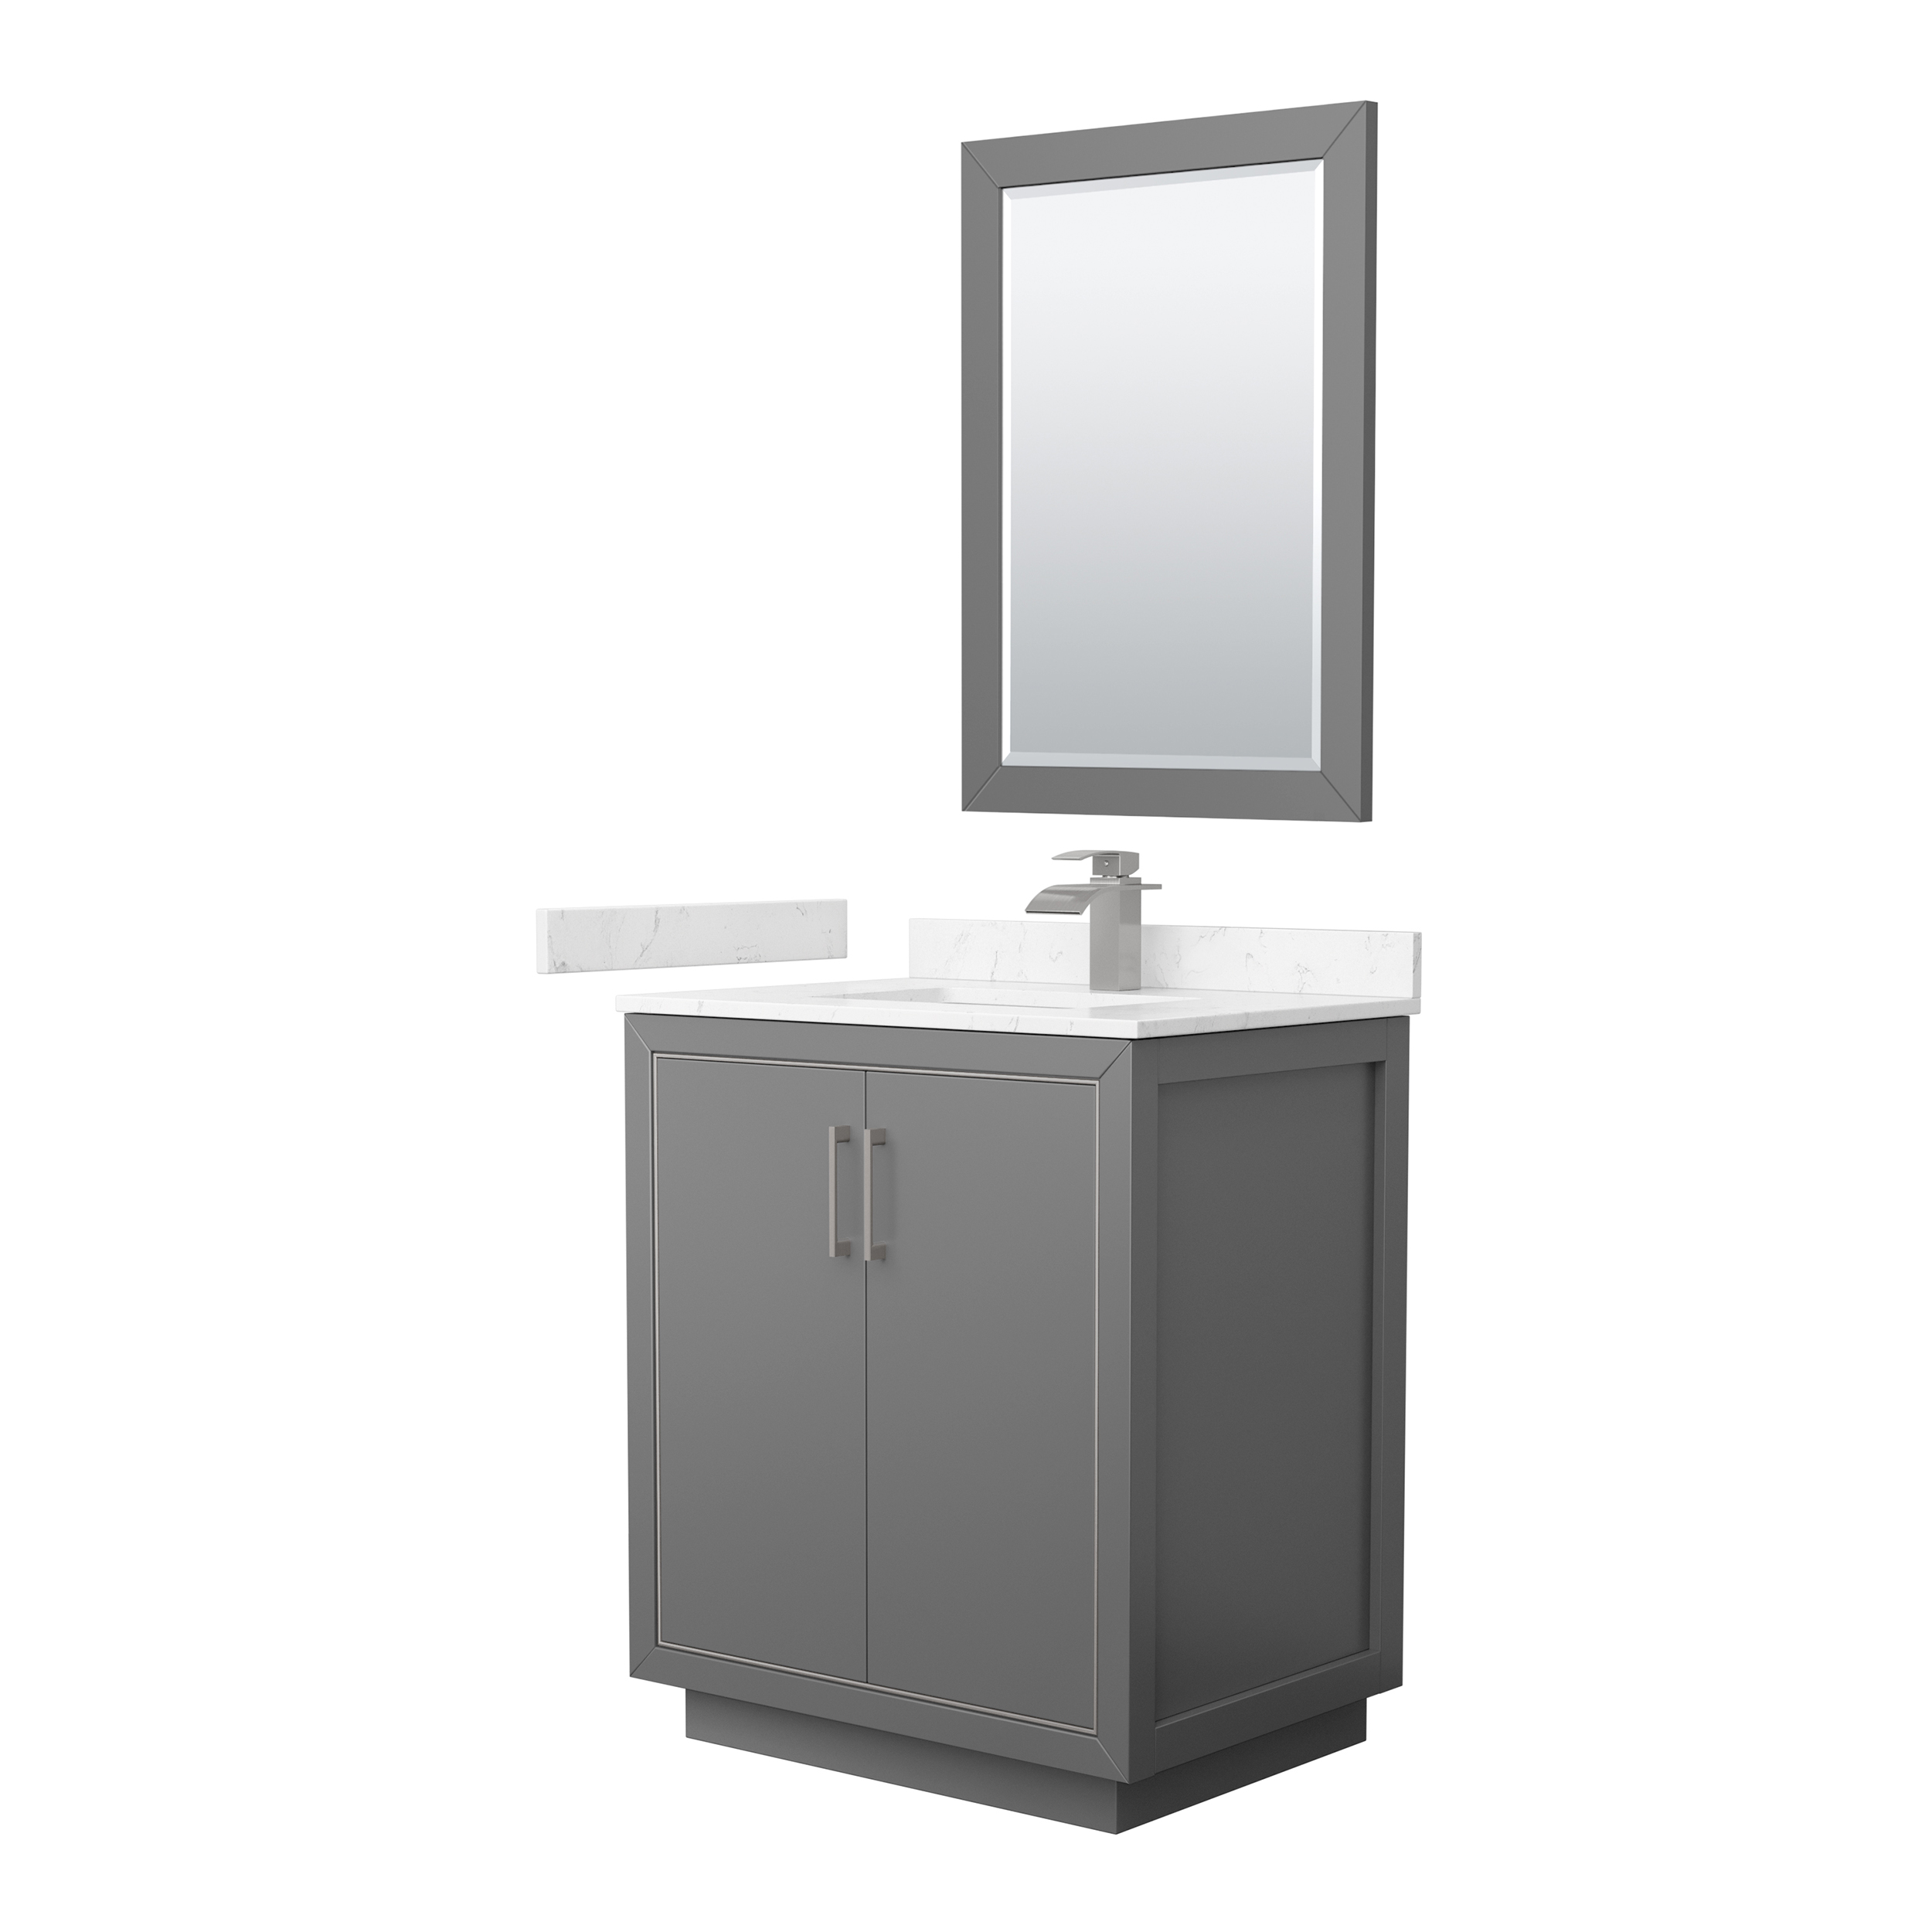 Icon 30" Single Vanity with optional Cultured Marble Counter - Dark Gray WC-1111-30-SGL-VAN-DKG-